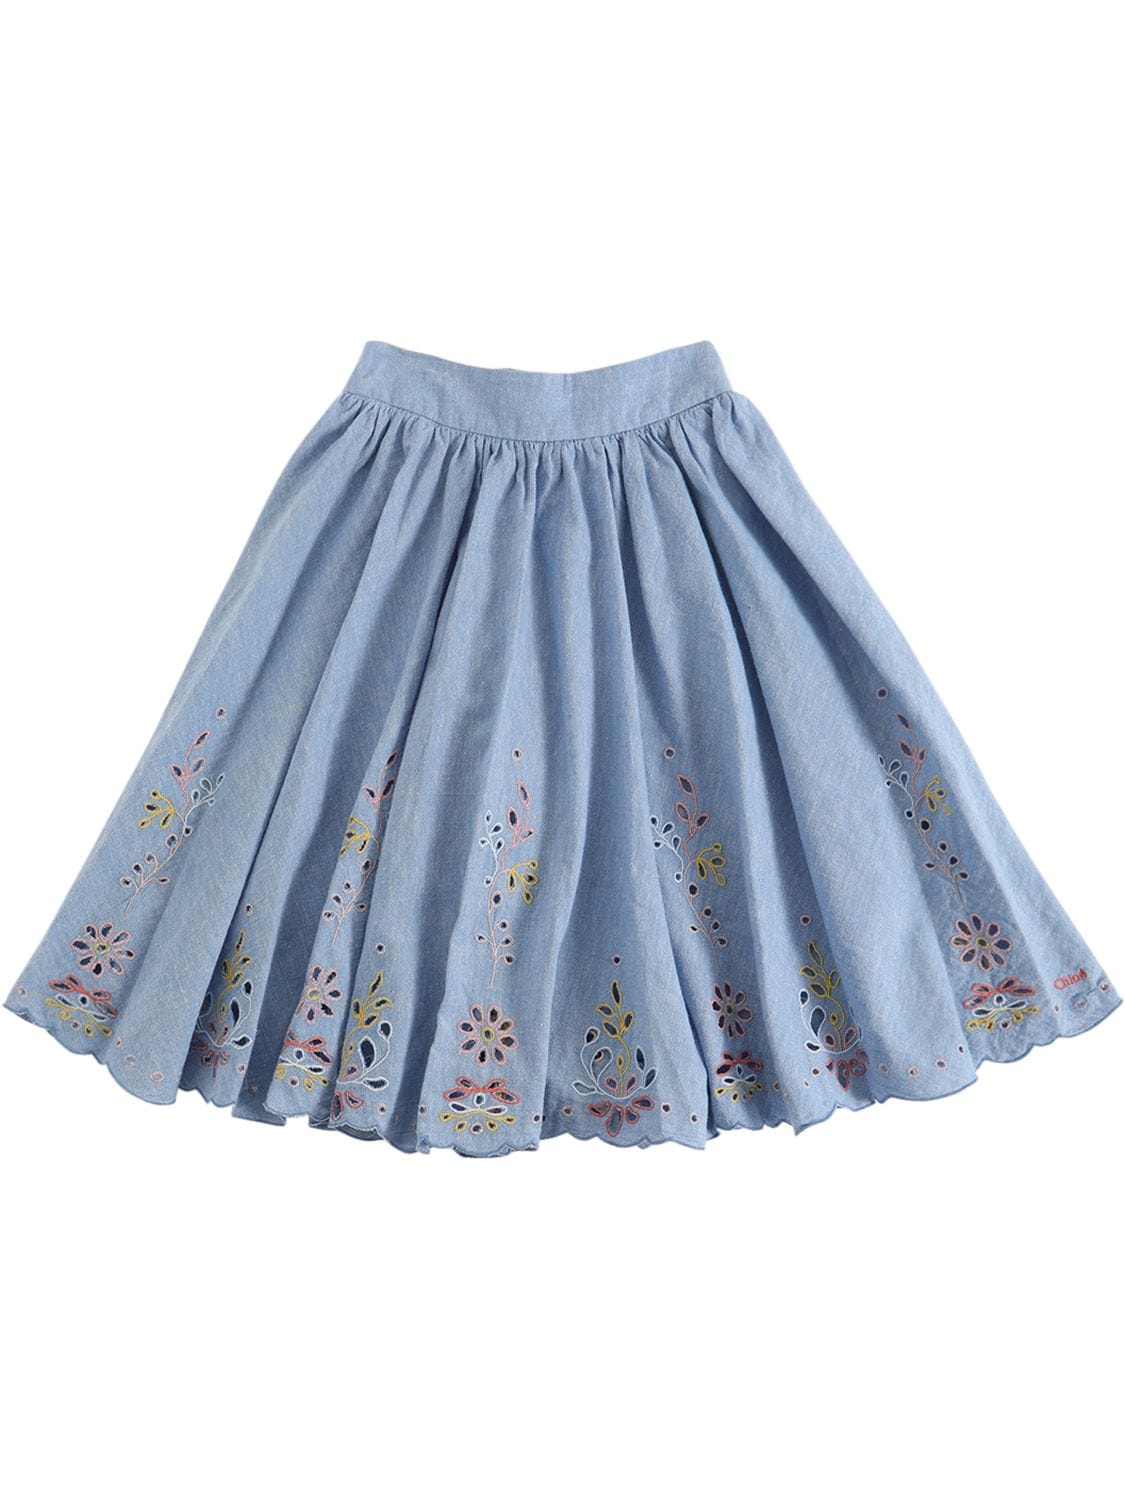 Chloé Kids' Embroidered Cotton Chambray Skirt In Denim